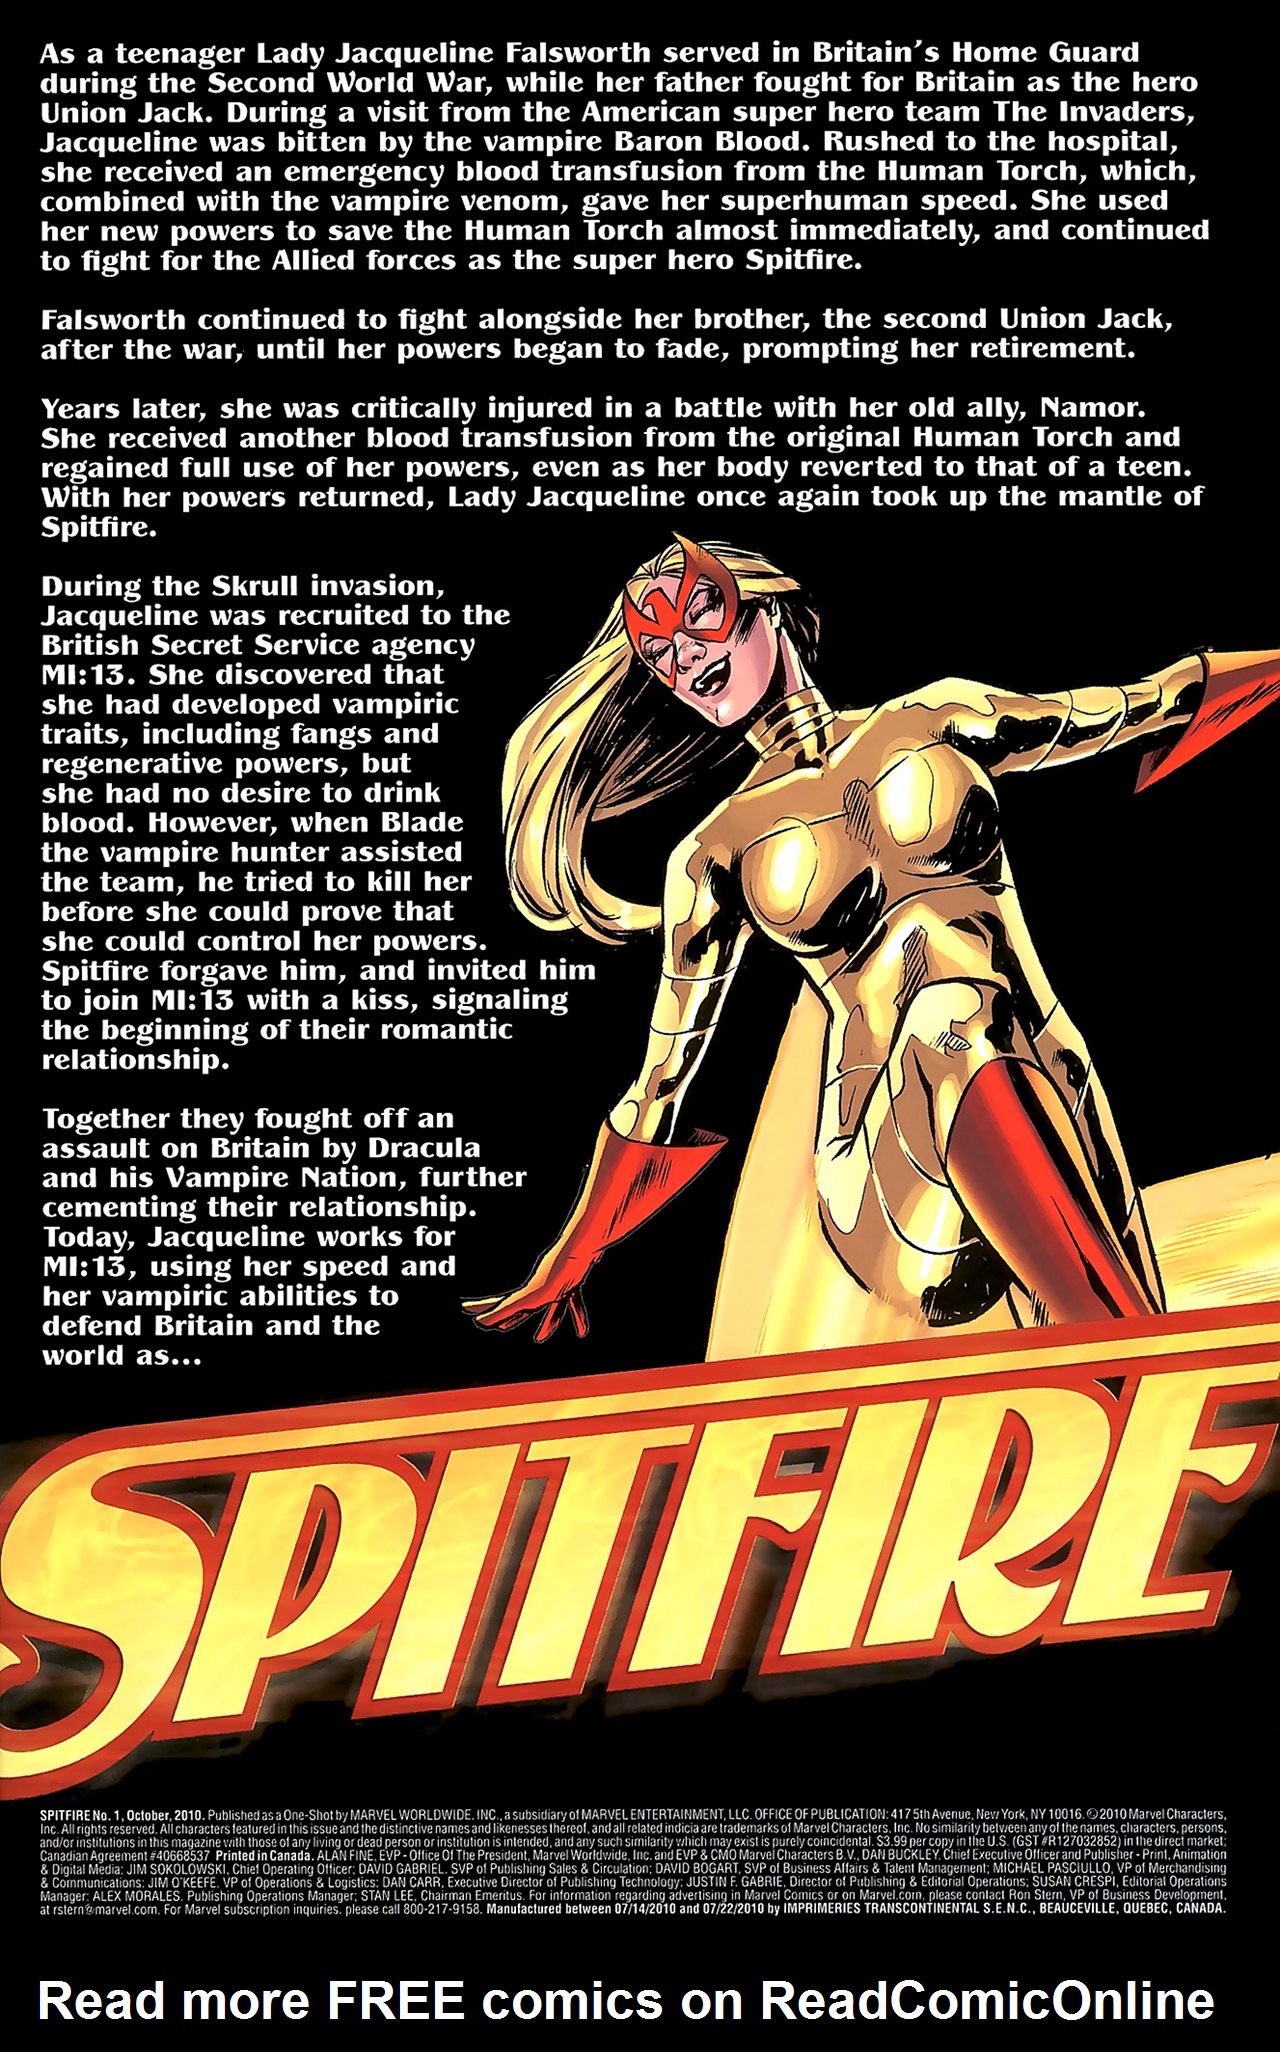 Read online Spitfire comic -  Issue # Full - 2